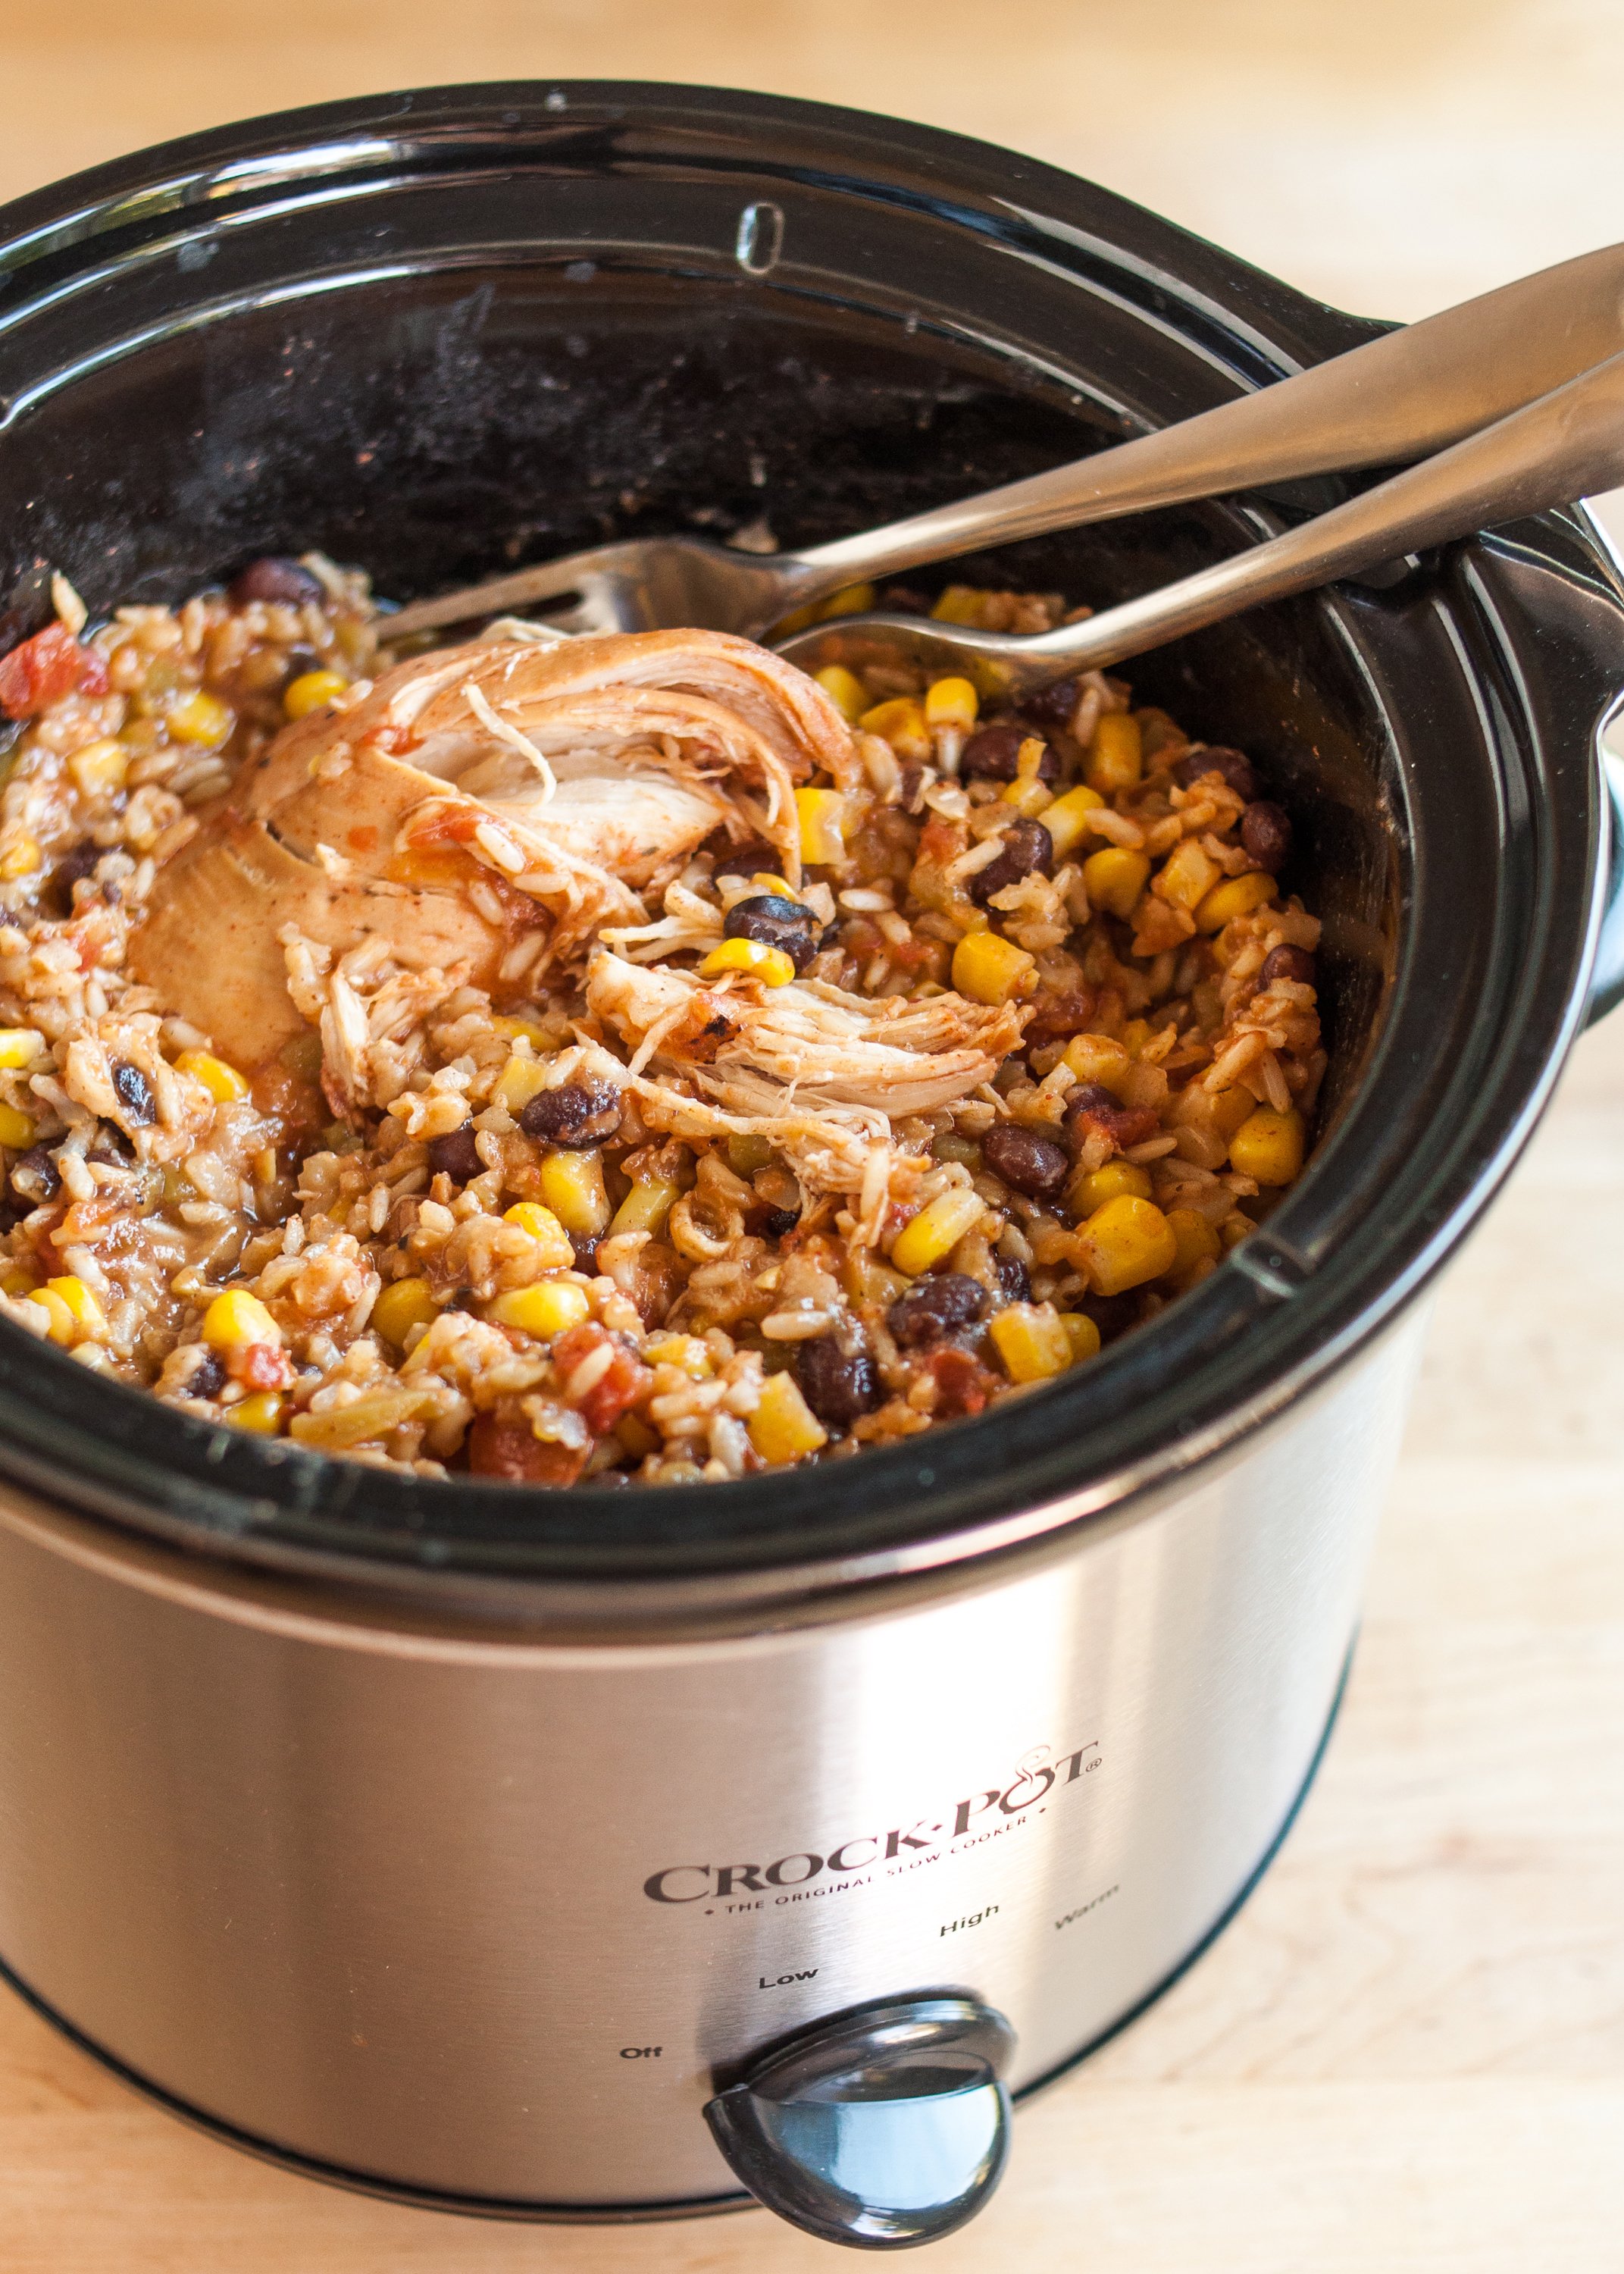 Why You Shouldn't Buy a Slow Cooker